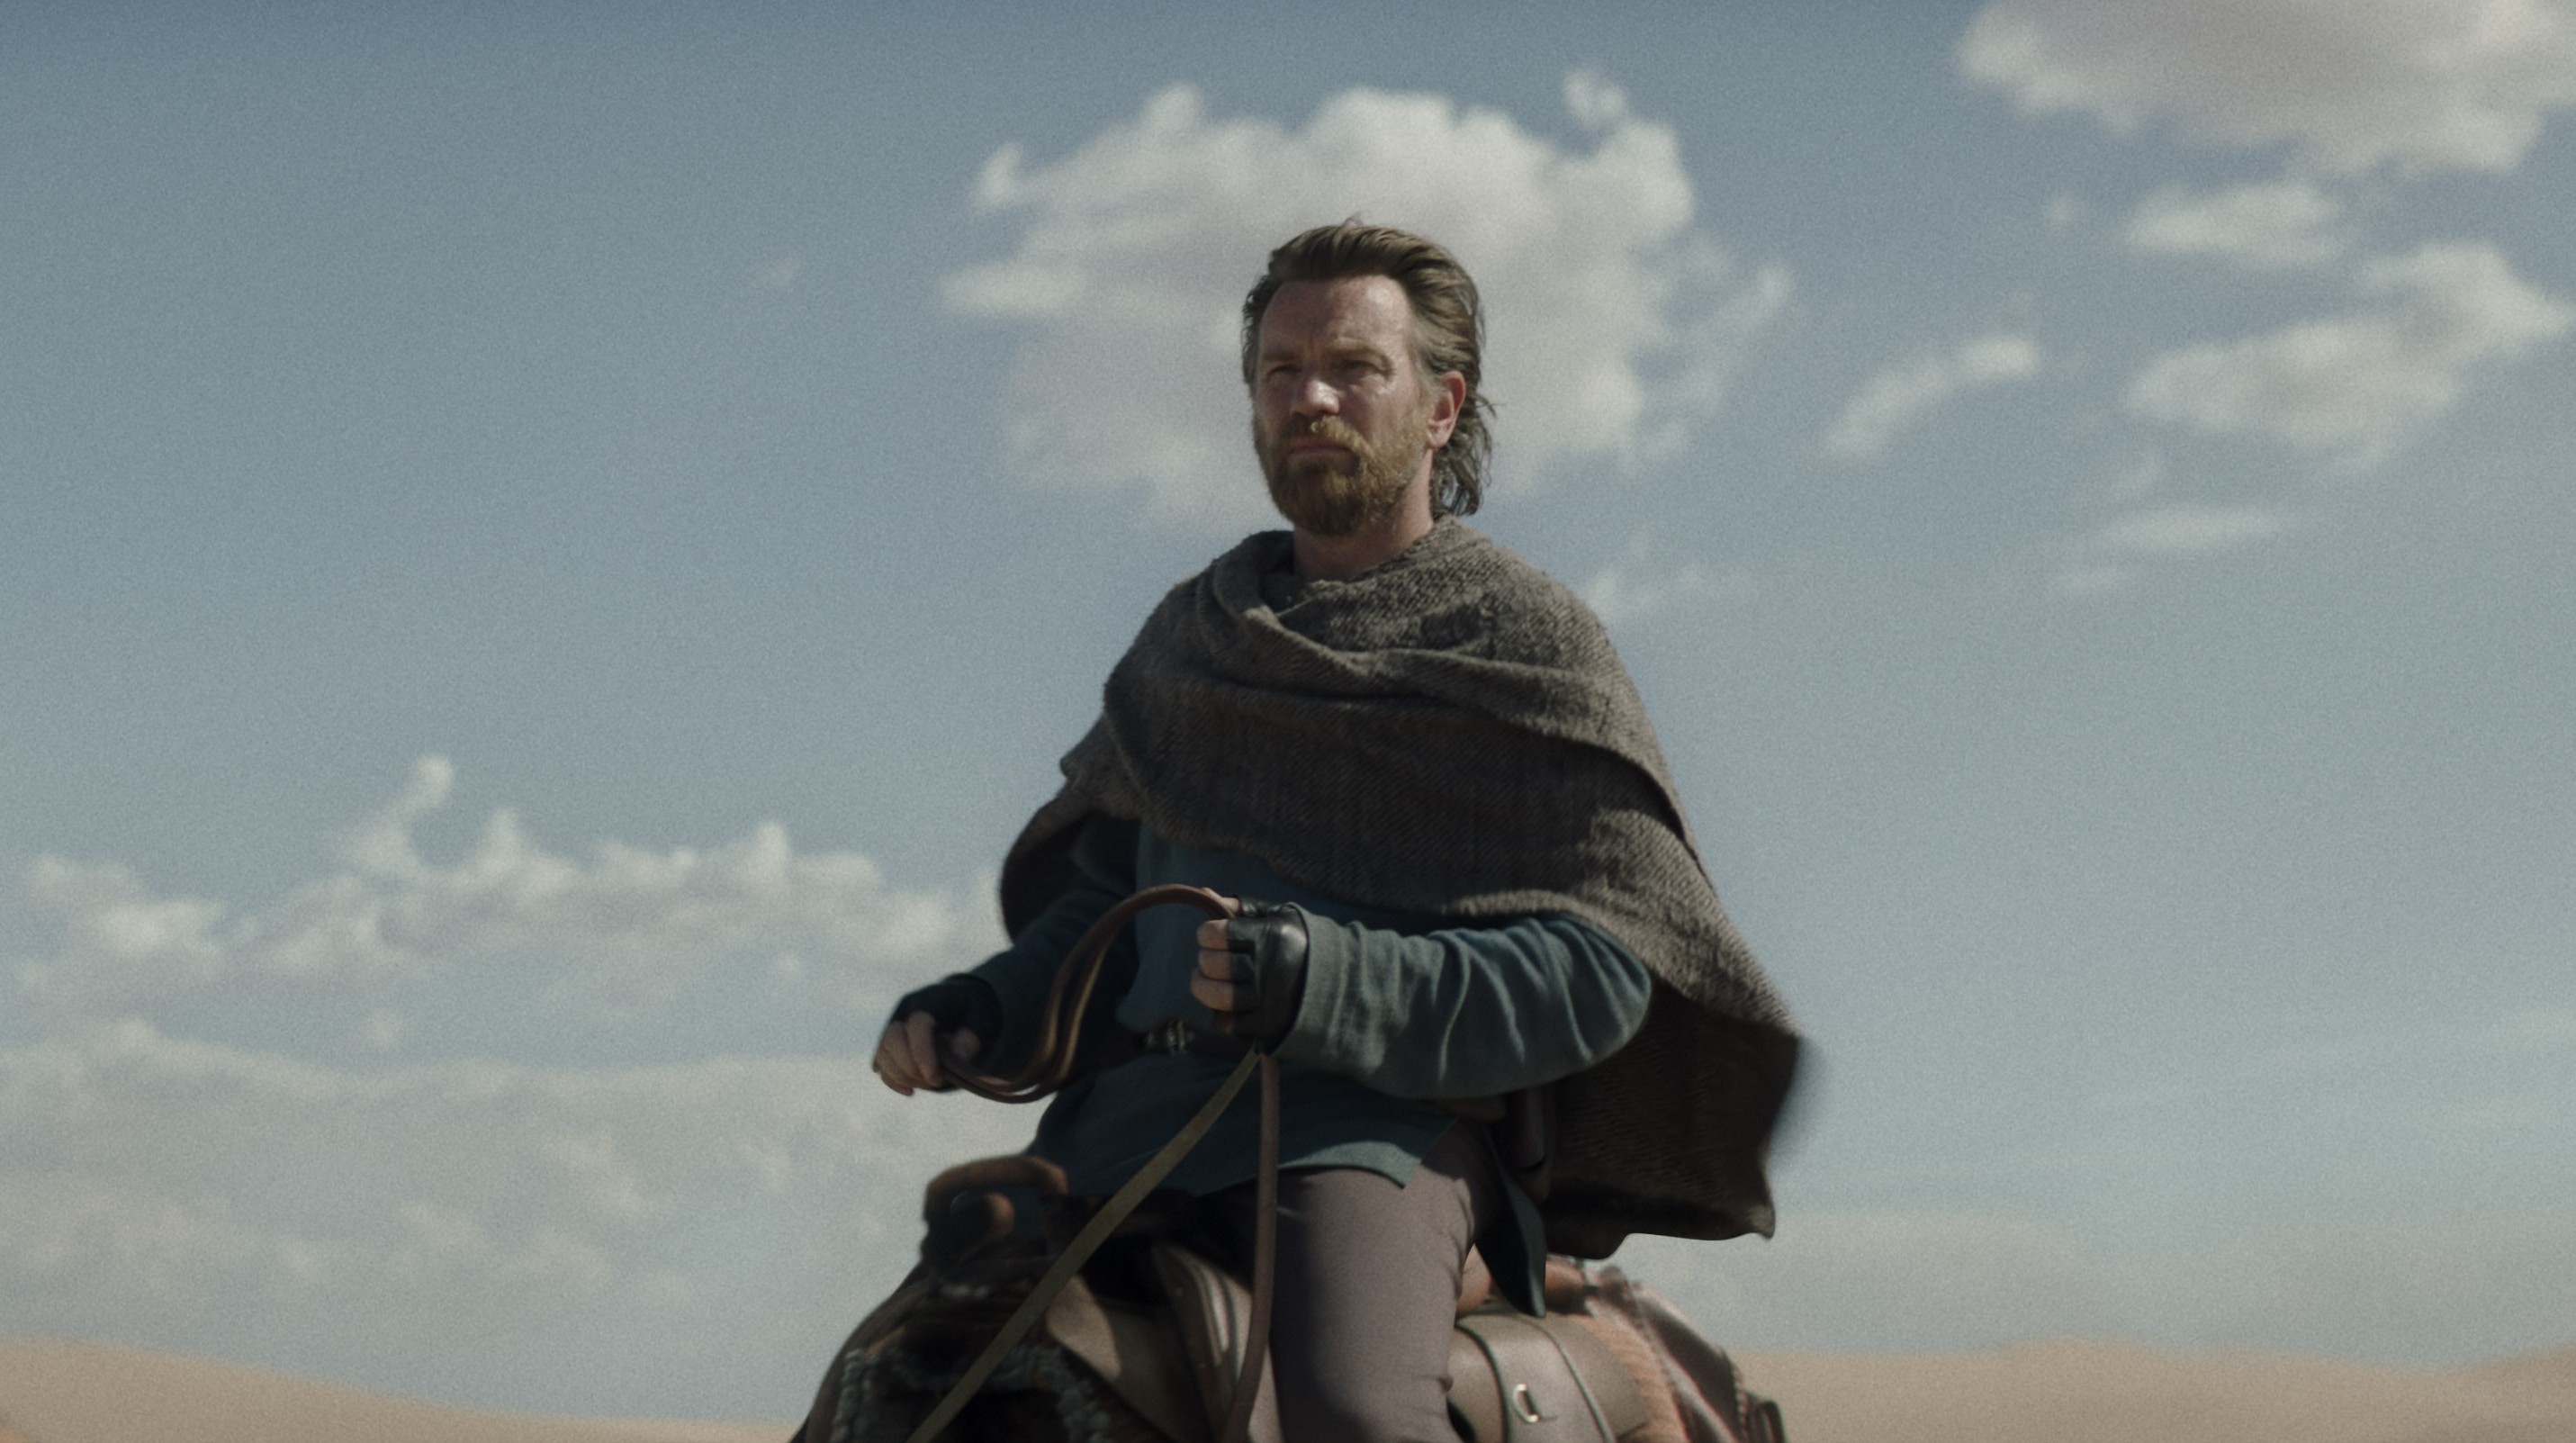 Moses Ingram almost drove Ewan McGregor off the road on their way to set